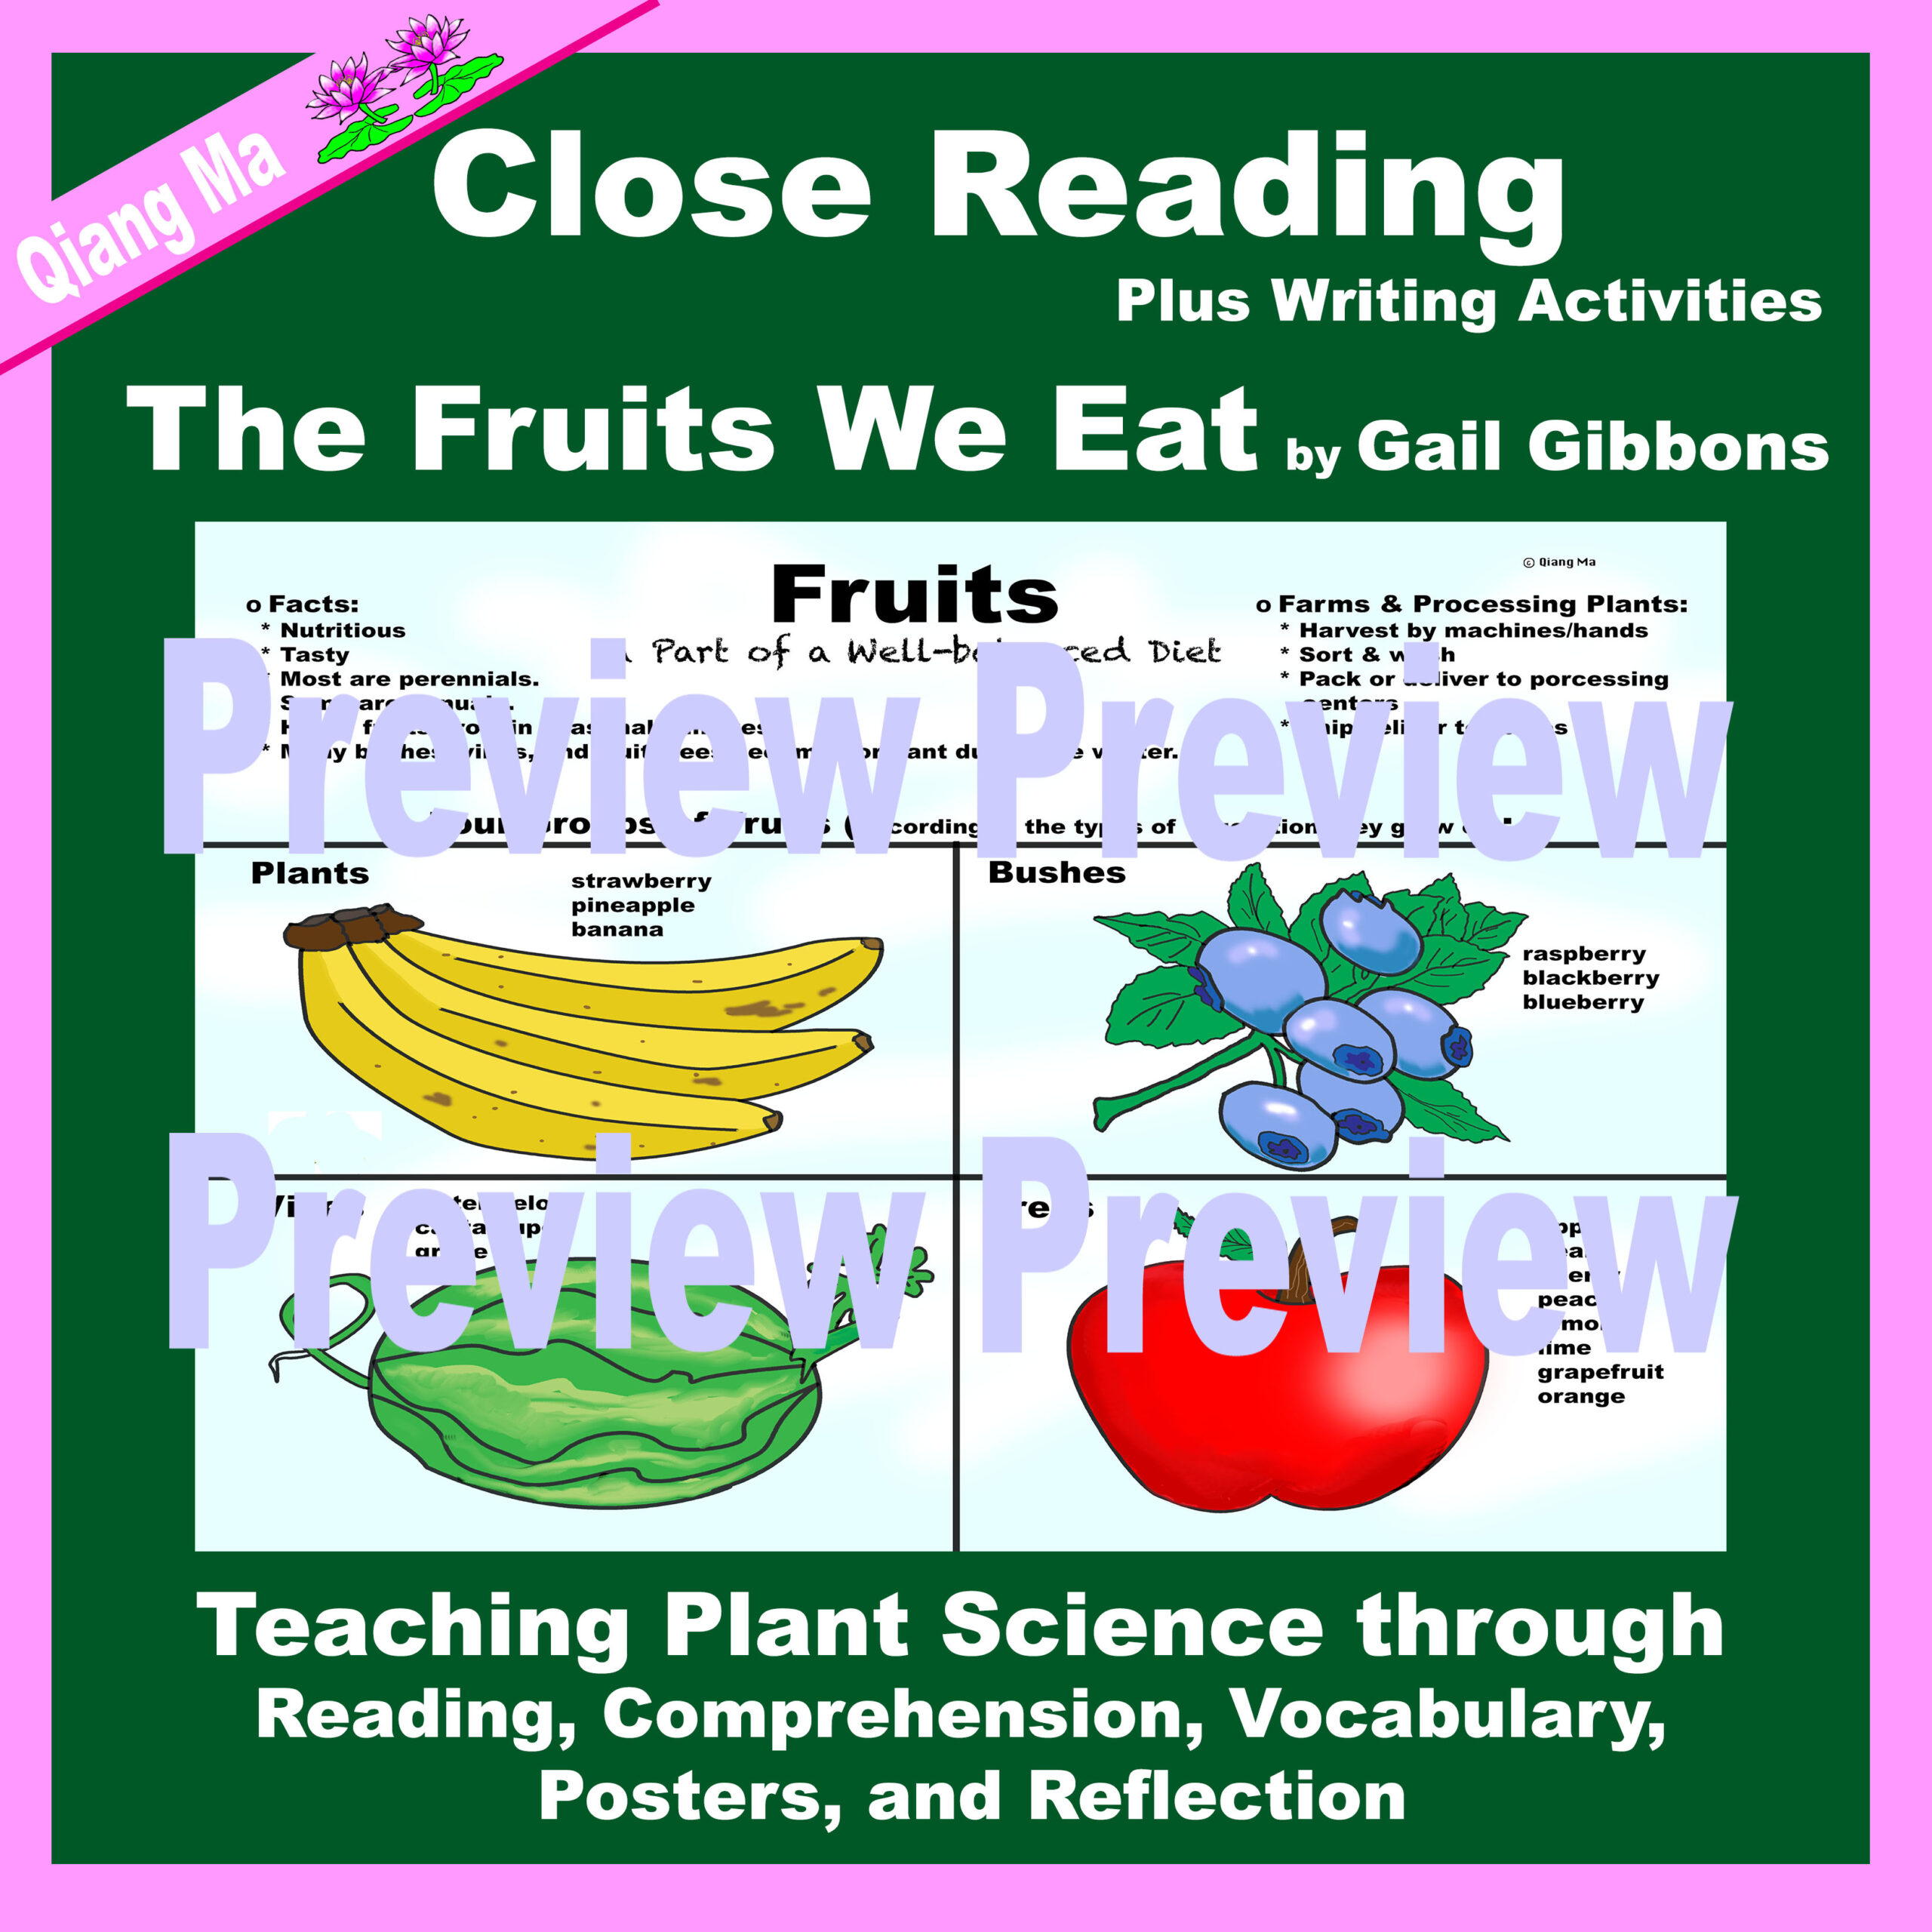 Close Reading: The Fruits We Eat by Gail Gibbons